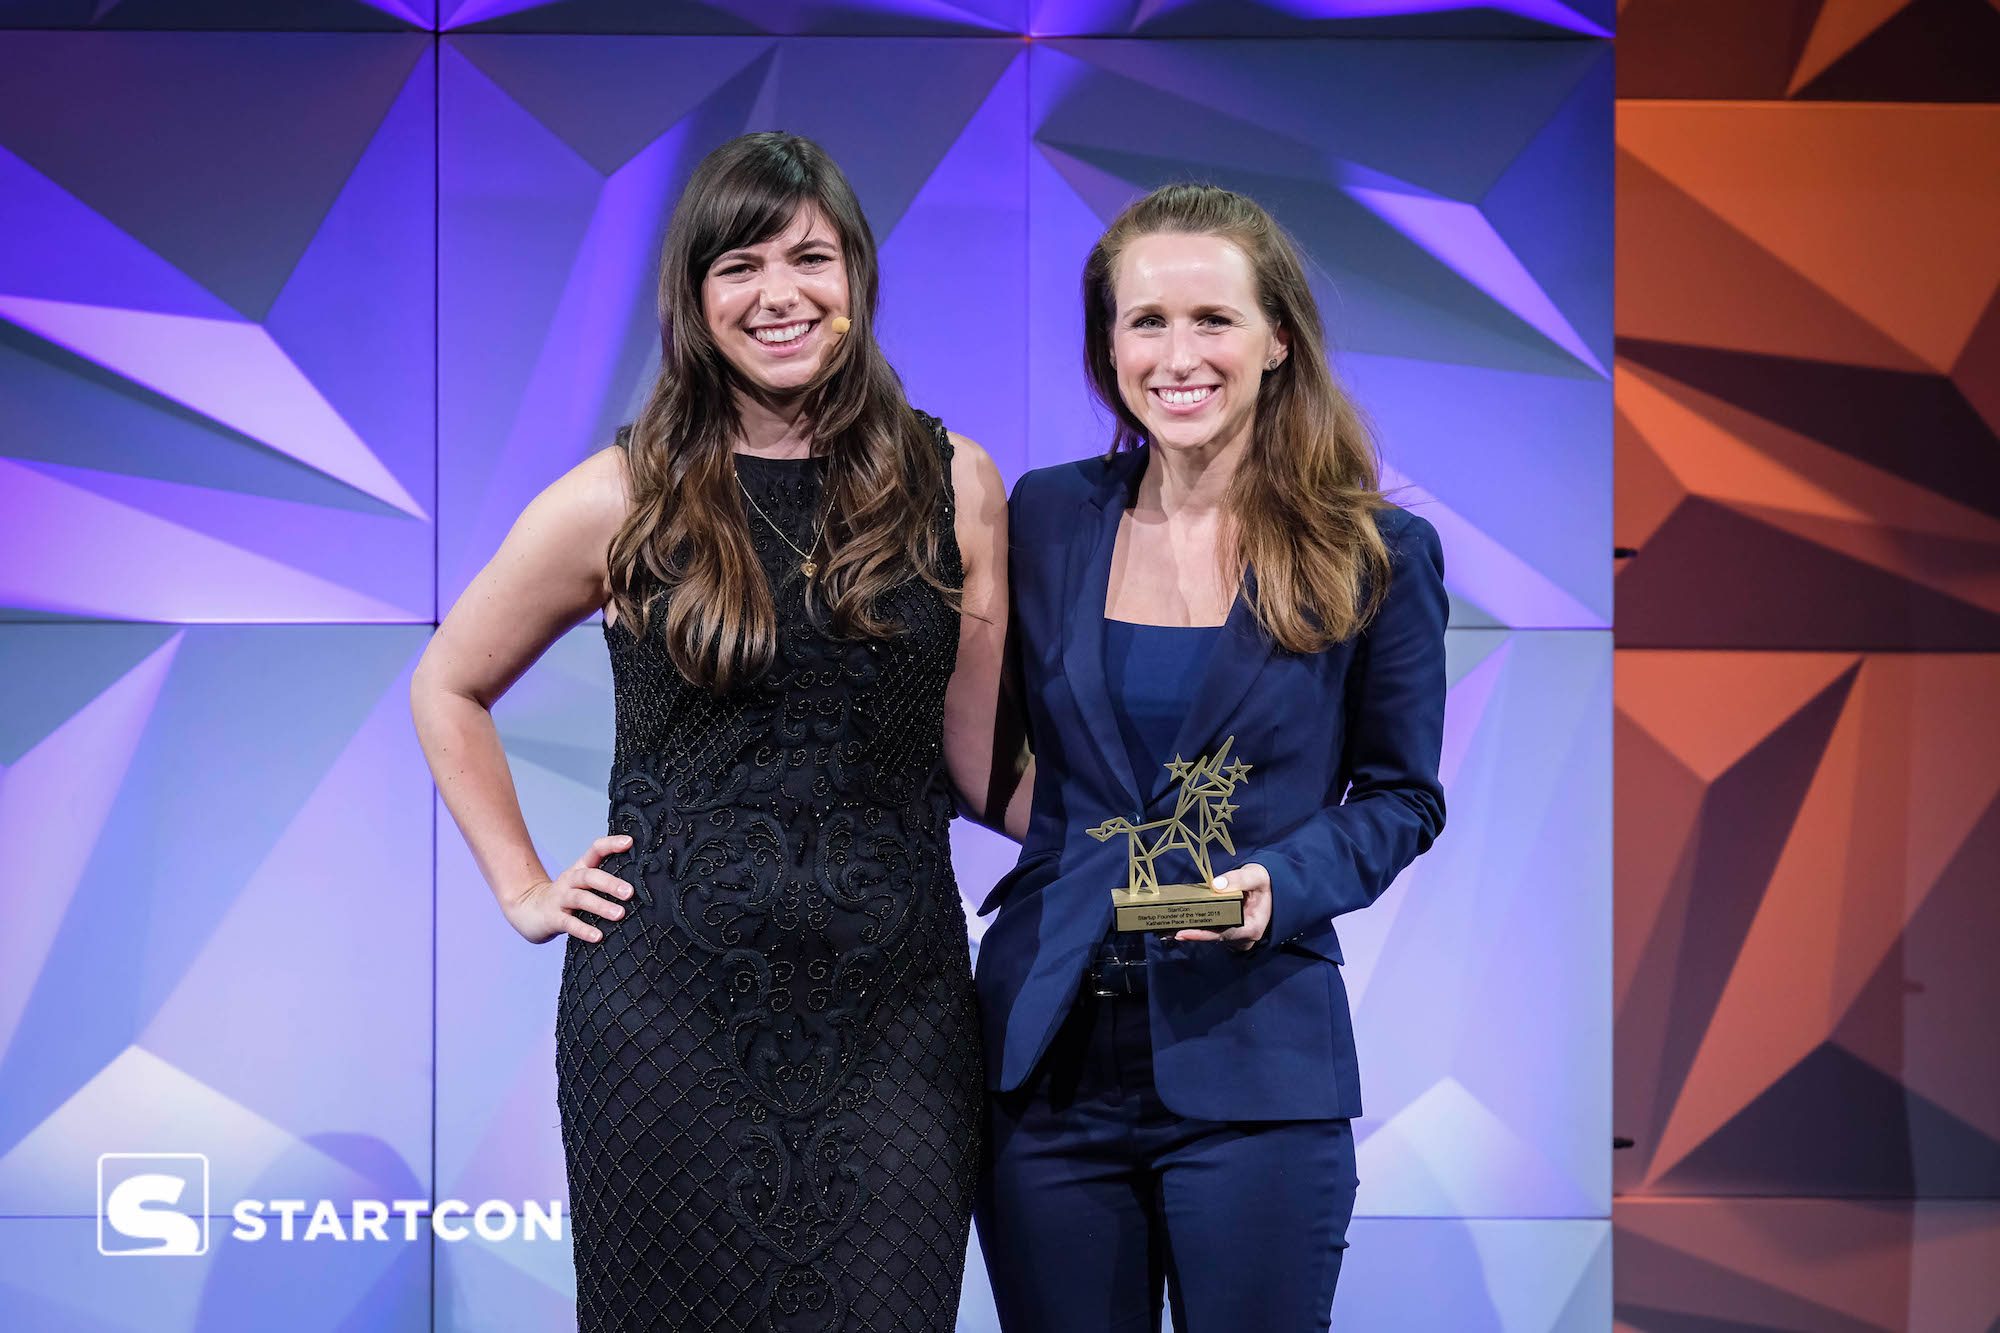 Startup Founder of the Year: Katherine Pace (Elanation)